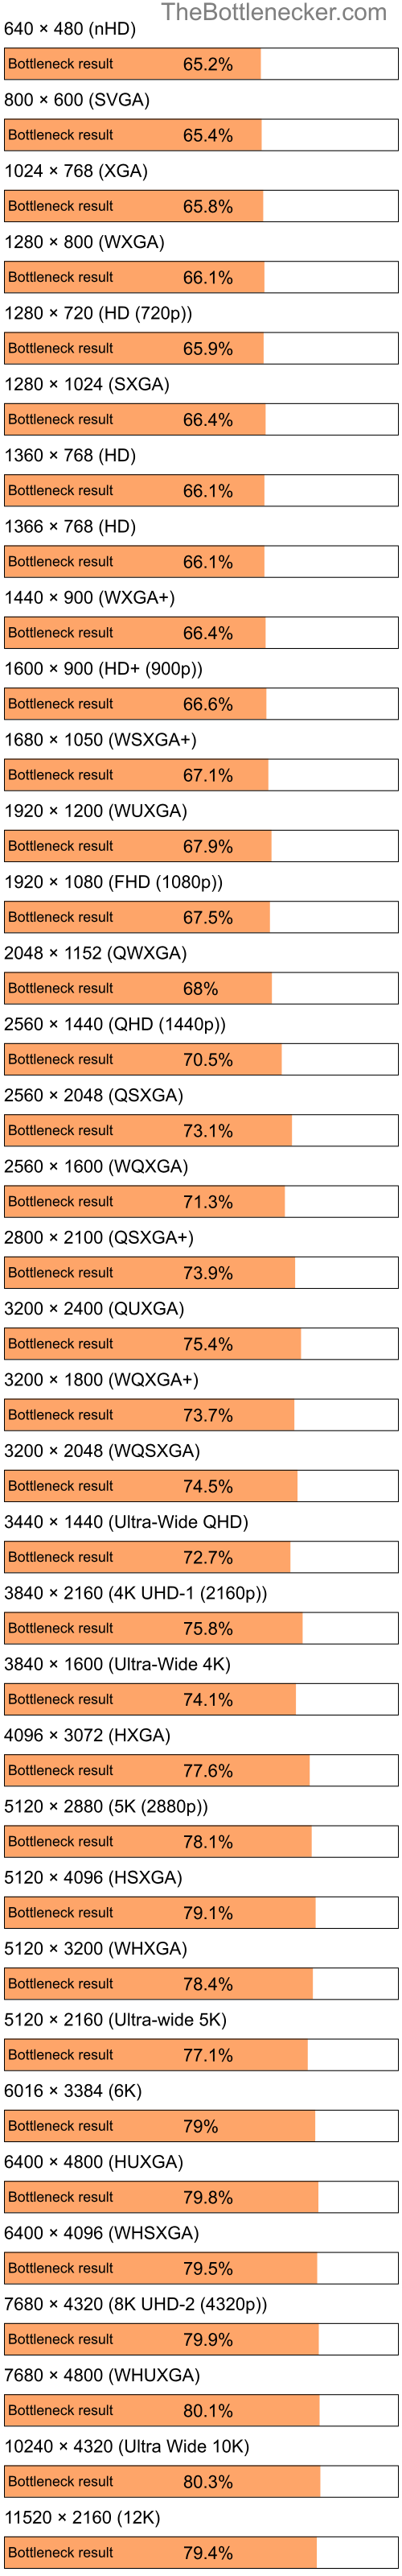 Bottleneck results by resolution for Intel Pentium 4 and AMD Mobility Radeon HD 4225 in General Tasks